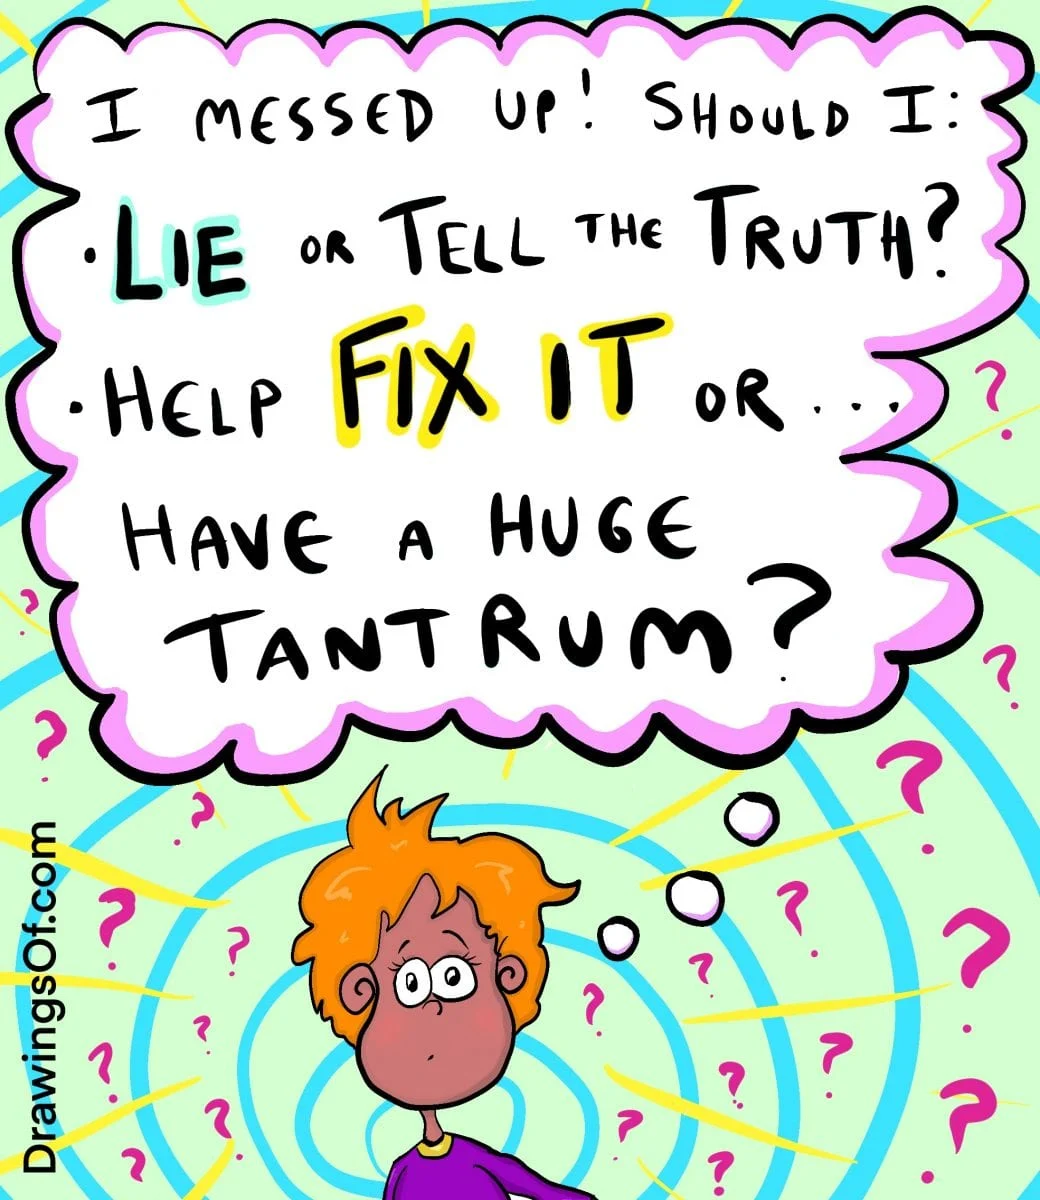 Child deciding what to do after messing up: lie and hide or tell the truth and help?